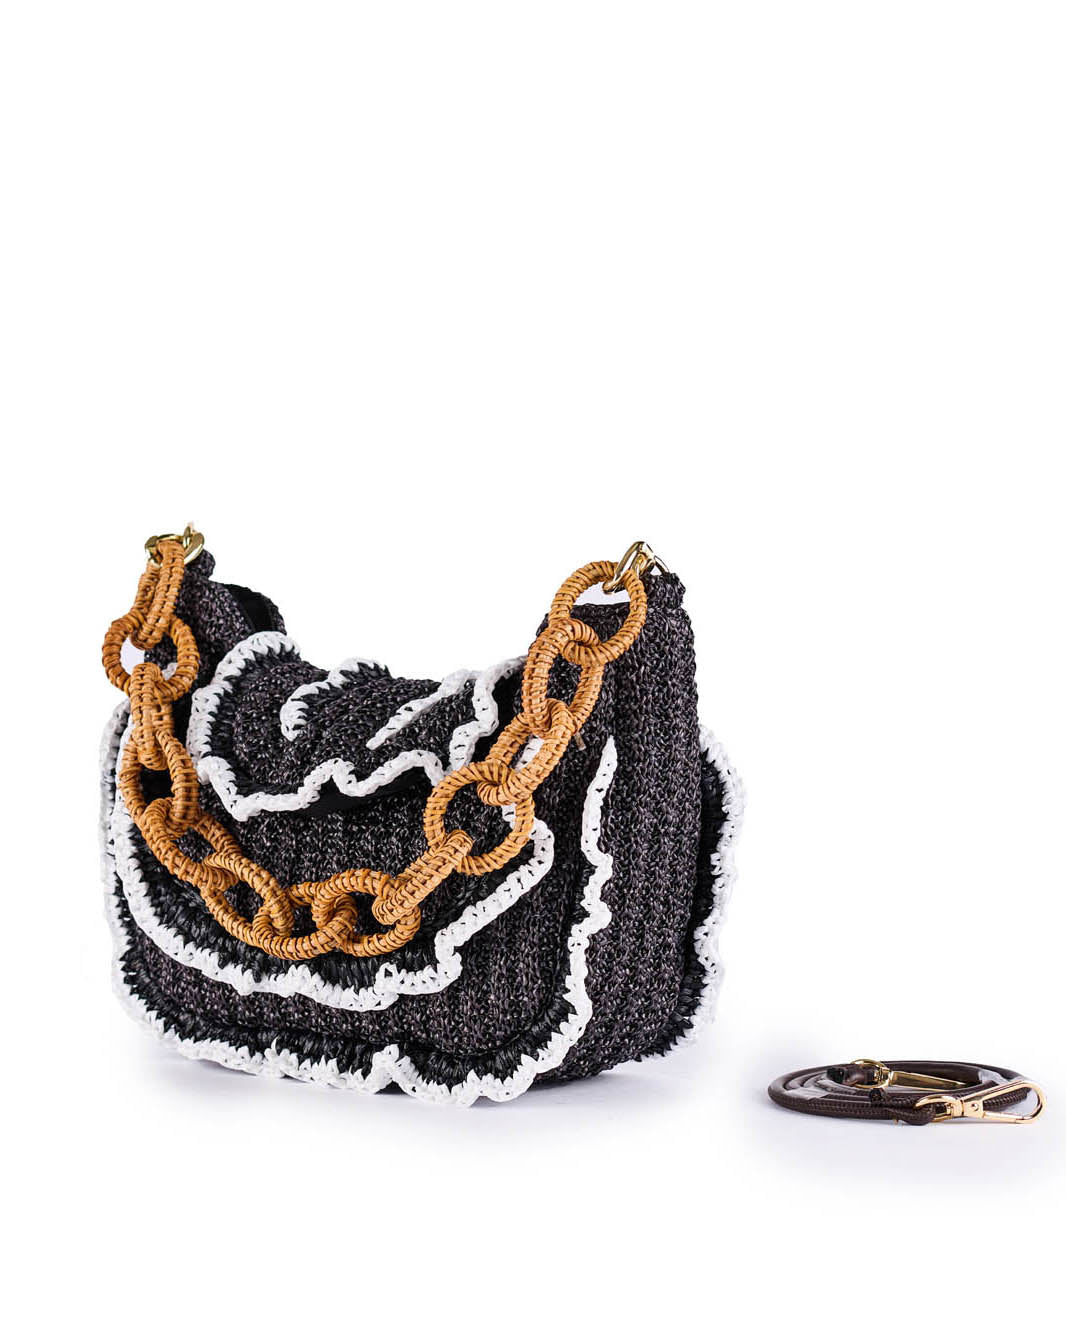 Chic black and white textured handbag with gold chain strap